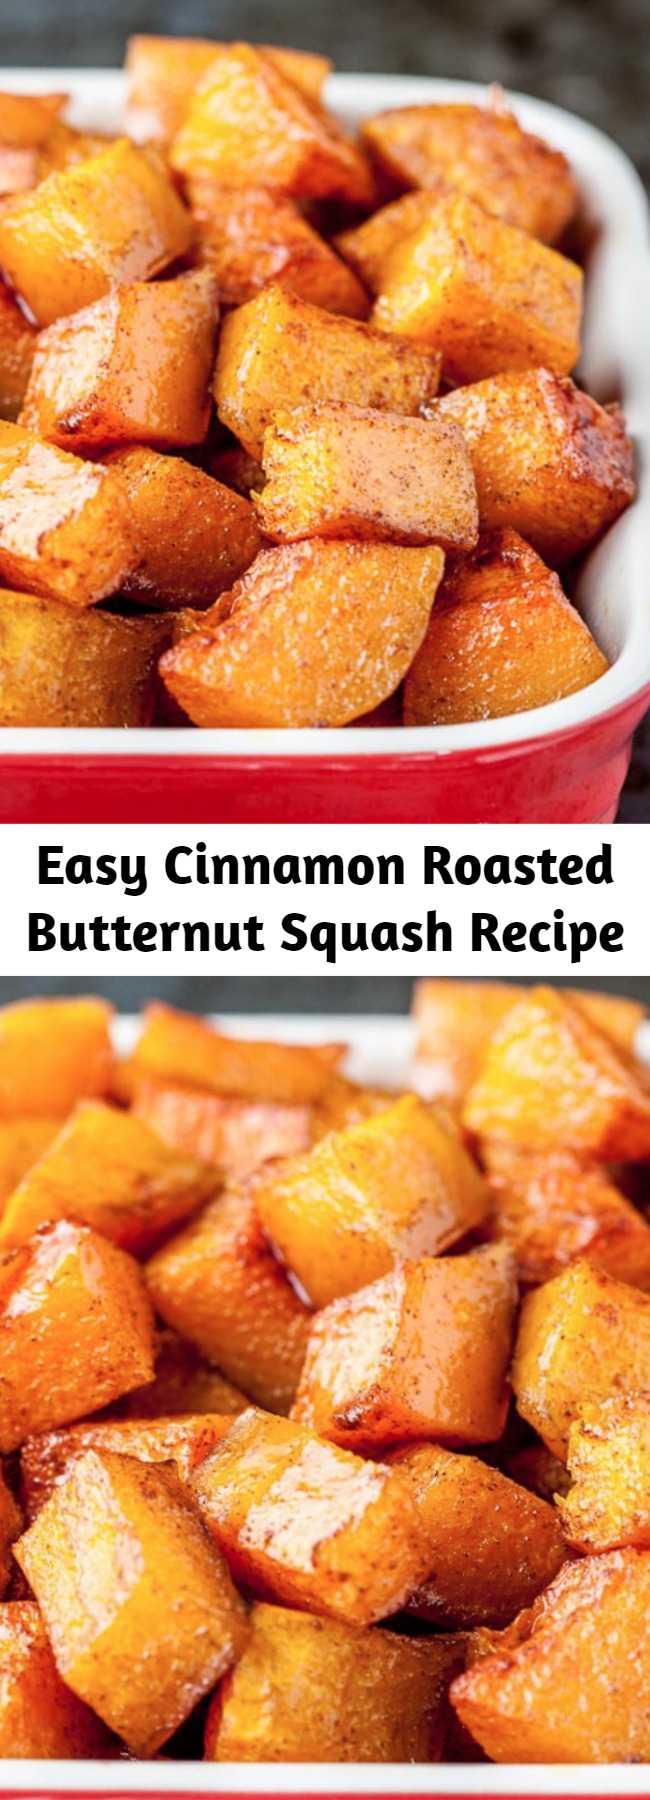 Easy Cinnamon Roasted Butternut Squash Recipe - This Cinnamon Roasted Butternut Squash is the perfect side dish for your fall/winter meals. It’s fantastic as is, or tossed together in salads, soups, or rice bowls. Plus, they’re a powerhouse of nutrition in every tasty bite!